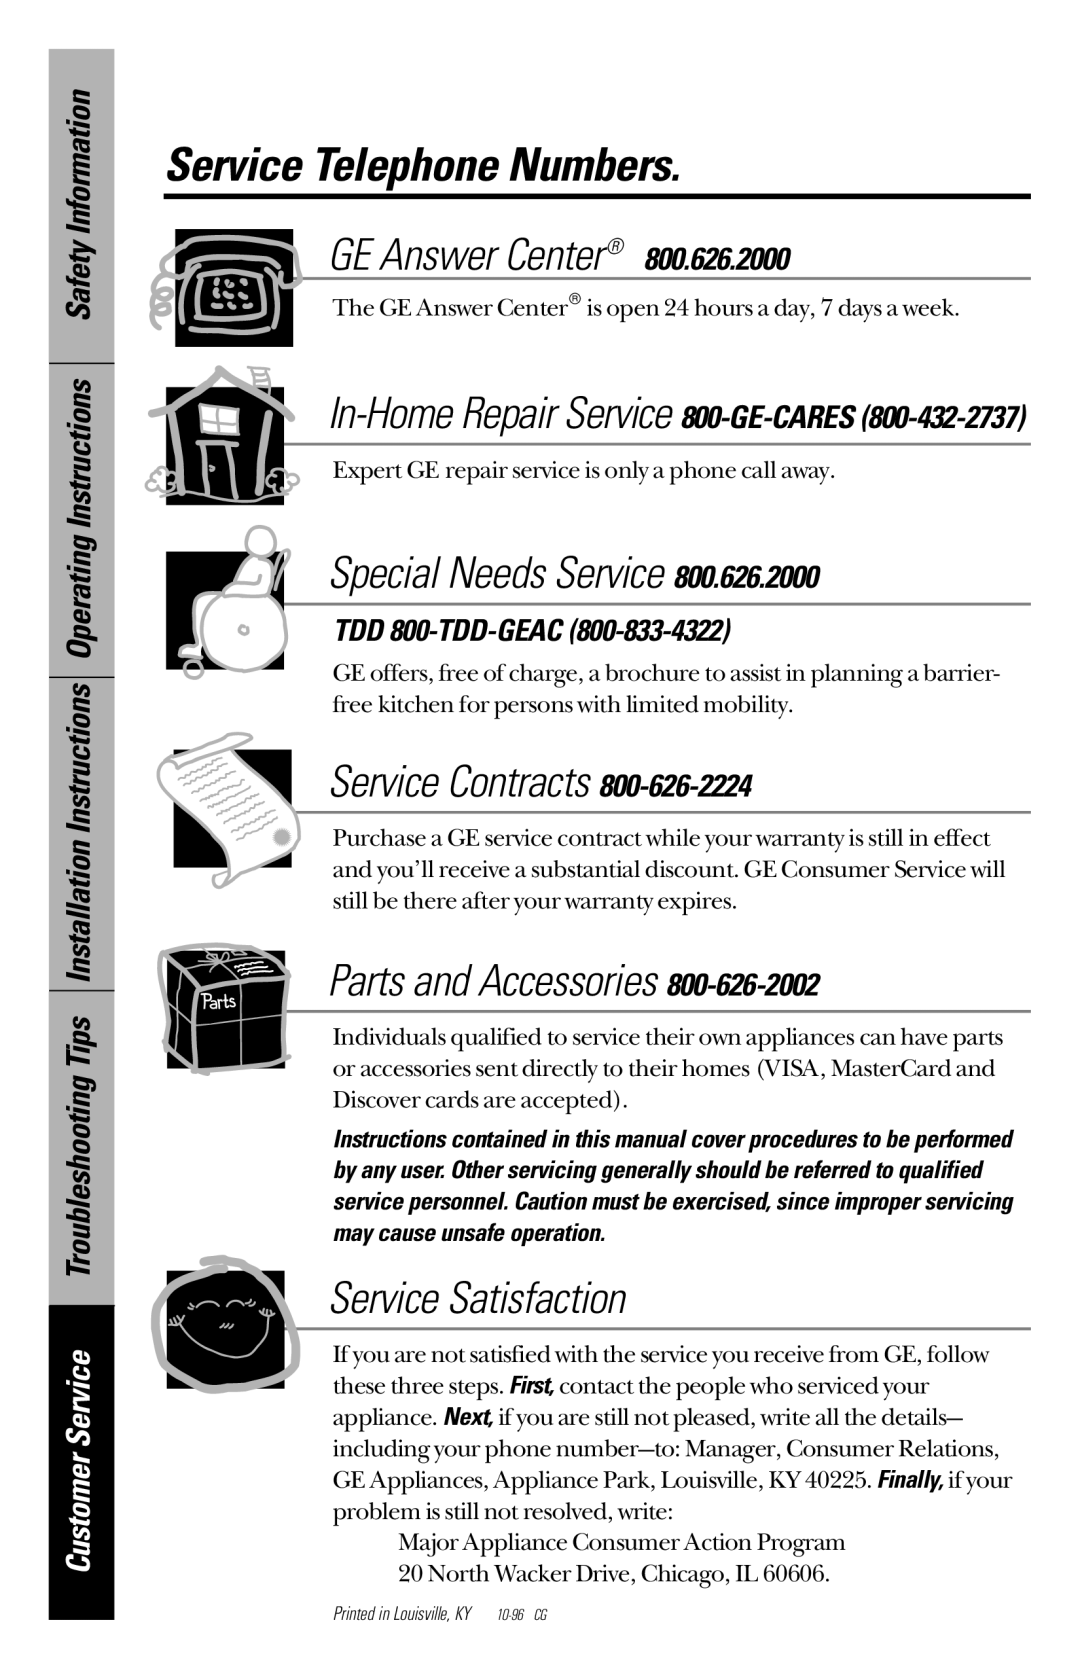 GE JBC27 In-Home Repair Service 800-GE-CARES, TDD 800-TDD-GEAC, GE Answer Center, Special Needs Service, Service Contracts 